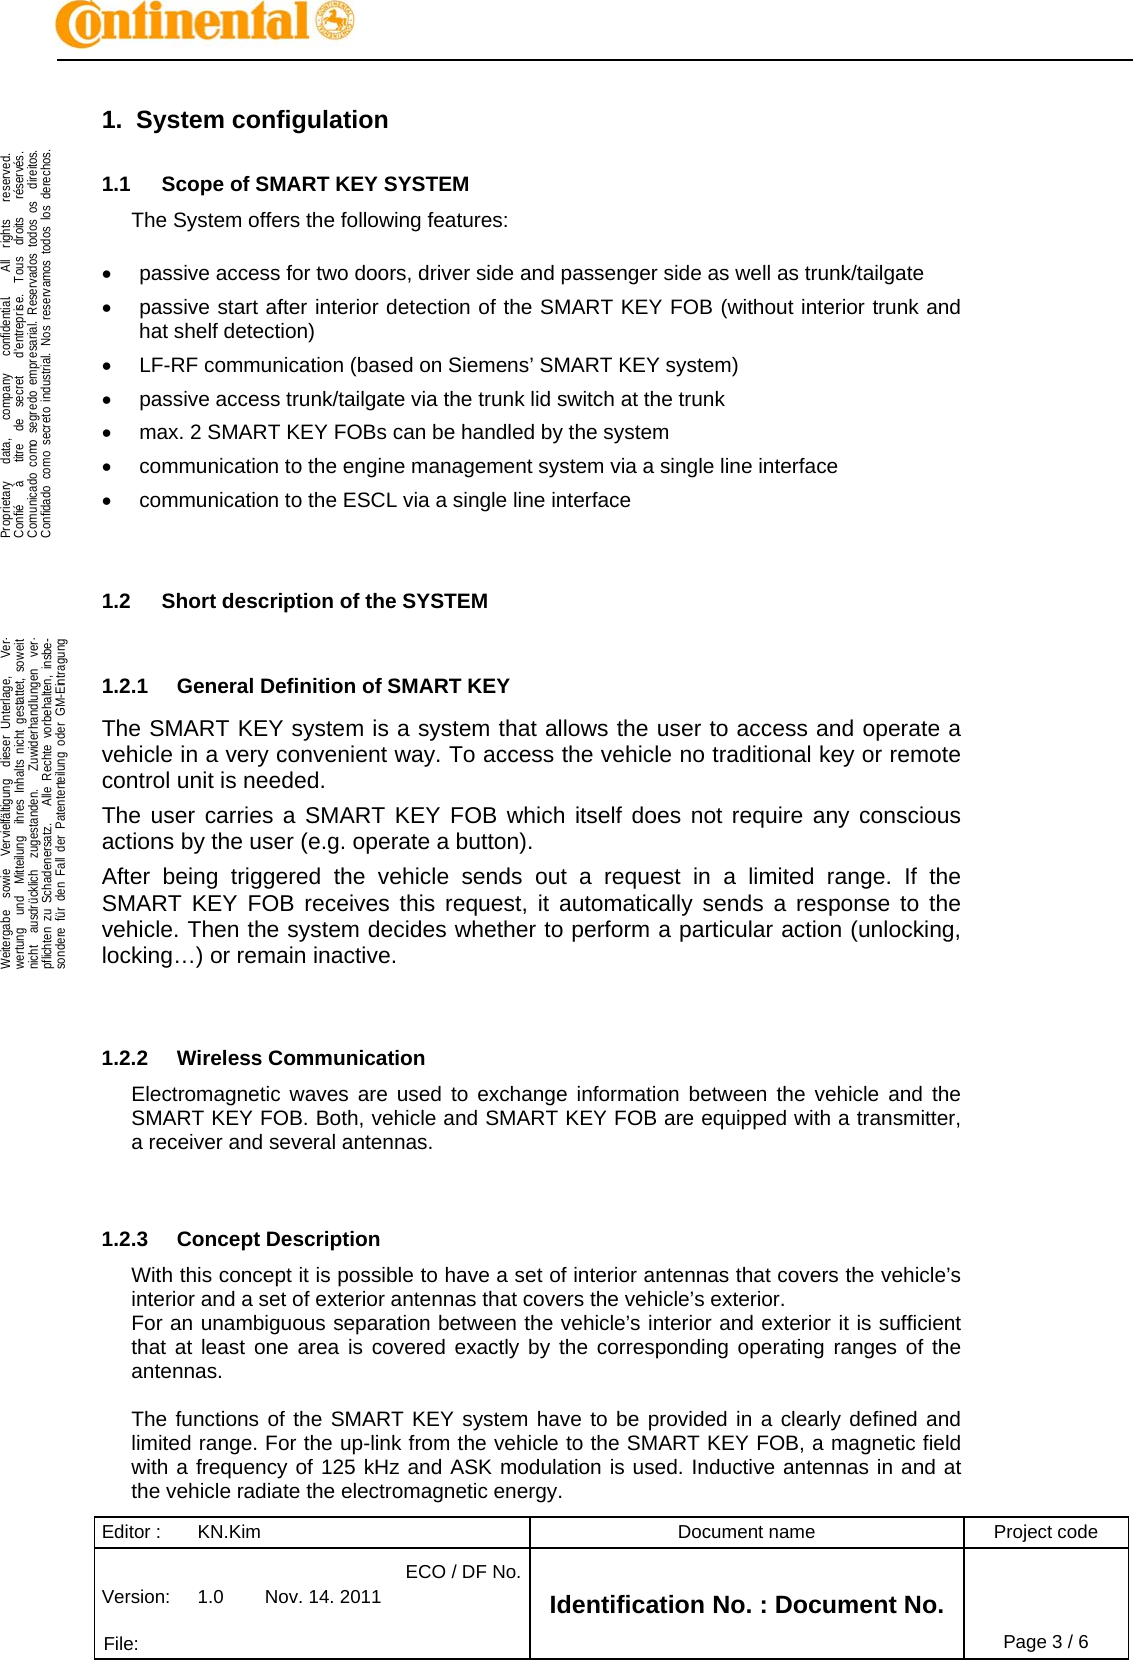 Editor :  KN.Kim  Document name  Project code Version:  1.0  Nov. 14. 2011 ECO / DF No.Identification No. : Document No.   File:   Page 3 / 6    .Proprietary   data,   company   confidential.    All  rights   reserved.Confié   à   titre  de  secret   d&apos;entreprise.  Tous  droits   réservés.Comunicado como segredo empresarial. Reservados todos os  direitos.Confidado como secreto industrial. Nos reservamos todos los derechos.  .Weitergabe  sowie  Vervielfältigung  dieser Unterlage,   Ver-wertung  und  Mitteilung  ihres Inhalts nicht gestattet, soweitnicht  ausdrücklich  zugestanden.   Zuwiderhandlungen  ver-pflichten zu Schadenersatz.   Alle Rechte vorbehalten, insbe-sondere für den Fall der Patenterteilung oder GM-Eintragung  1. System configulation 1.1  Scope of SMART KEY SYSTEM The System offers the following features:    passive access for two doors, driver side and passenger side as well as trunk/tailgate   passive start after interior detection of the SMART KEY FOB (without interior trunk and hat shelf detection)   LF-RF communication (based on Siemens’ SMART KEY system)   passive access trunk/tailgate via the trunk lid switch at the trunk   max. 2 SMART KEY FOBs can be handled by the system   communication to the engine management system via a single line interface   communication to the ESCL via a single line interface   1.2  Short description of the SYSTEM  1.2.1  General Definition of SMART KEY The SMART KEY system is a system that allows the user to access and operate a vehicle in a very convenient way. To access the vehicle no traditional key or remote control unit is needed.  The user carries a SMART KEY FOB which itself does not require any conscious actions by the user (e.g. operate a button).  After being triggered the vehicle sends out a request in a limited range. If the SMART KEY FOB receives this request, it automatically sends a response to the vehicle. Then the system decides whether to perform a particular action (unlocking, locking…) or remain inactive.   1.2.2 Wireless Communication Electromagnetic waves are used to exchange information between the vehicle and the SMART KEY FOB. Both, vehicle and SMART KEY FOB are equipped with a transmitter, a receiver and several antennas.    1.2.3 Concept Description With this concept it is possible to have a set of interior antennas that covers the vehicle’s interior and a set of exterior antennas that covers the vehicle’s exterior. For an unambiguous separation between the vehicle’s interior and exterior it is sufficient that at least one area is covered exactly by the corresponding operating ranges of the antennas.  The functions of the SMART KEY system have to be provided in a clearly defined and limited range. For the up-link from the vehicle to the SMART KEY FOB, a magnetic field with a frequency of 125 kHz and ASK modulation is used. Inductive antennas in and at the vehicle radiate the electromagnetic energy. 